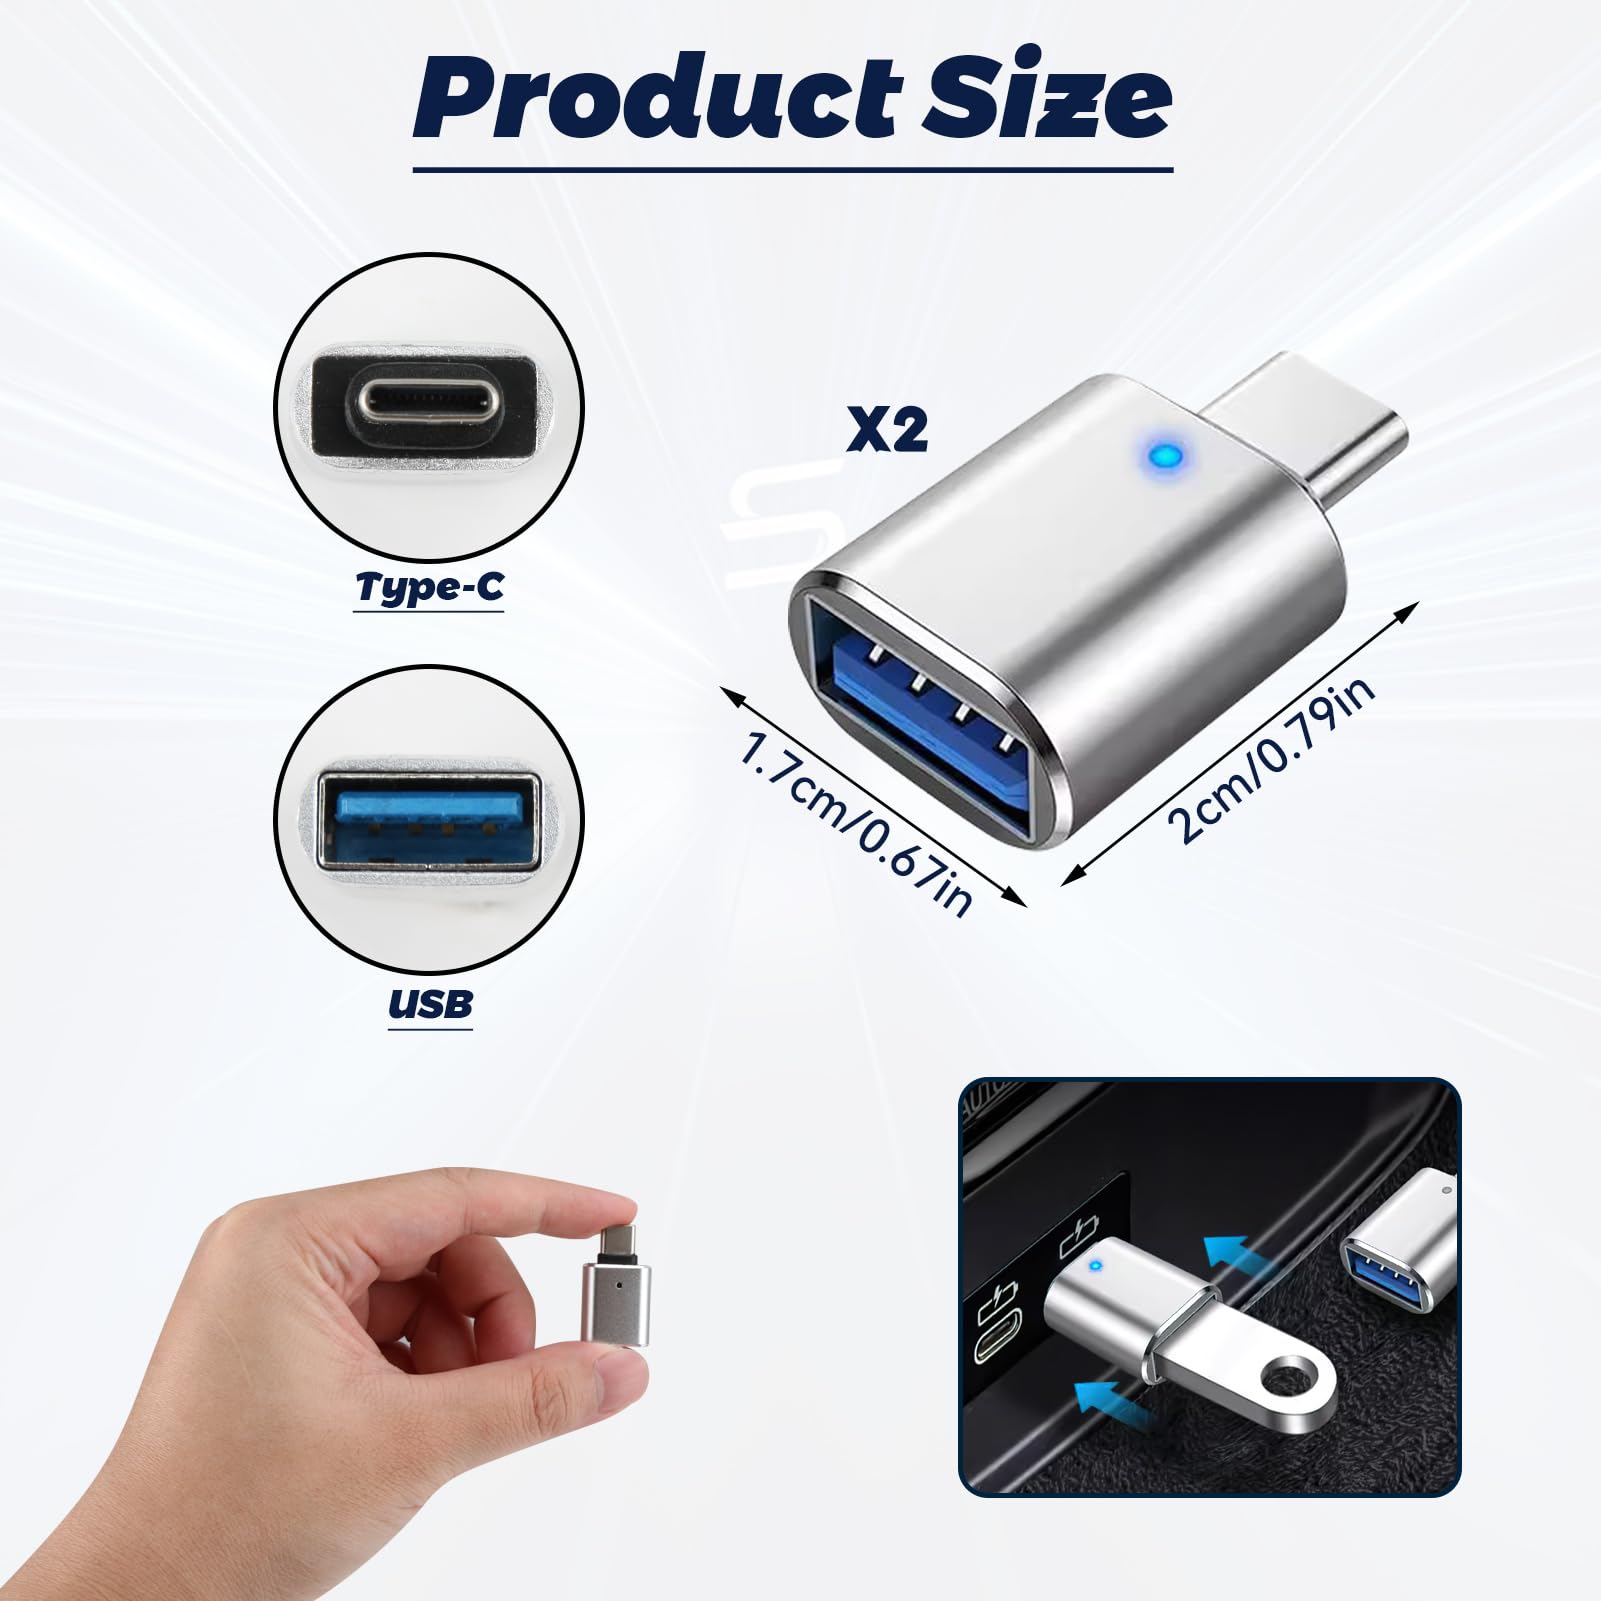 2 Pack USB to USB C Adapter, Type C to USB 3.0 Converters for Macbook Air 2020,Samsung Notebook 9, Dell Xps,Laptop,I-Pad,Other Type C Devices,Durable,High Speed Charging,Data Transfer